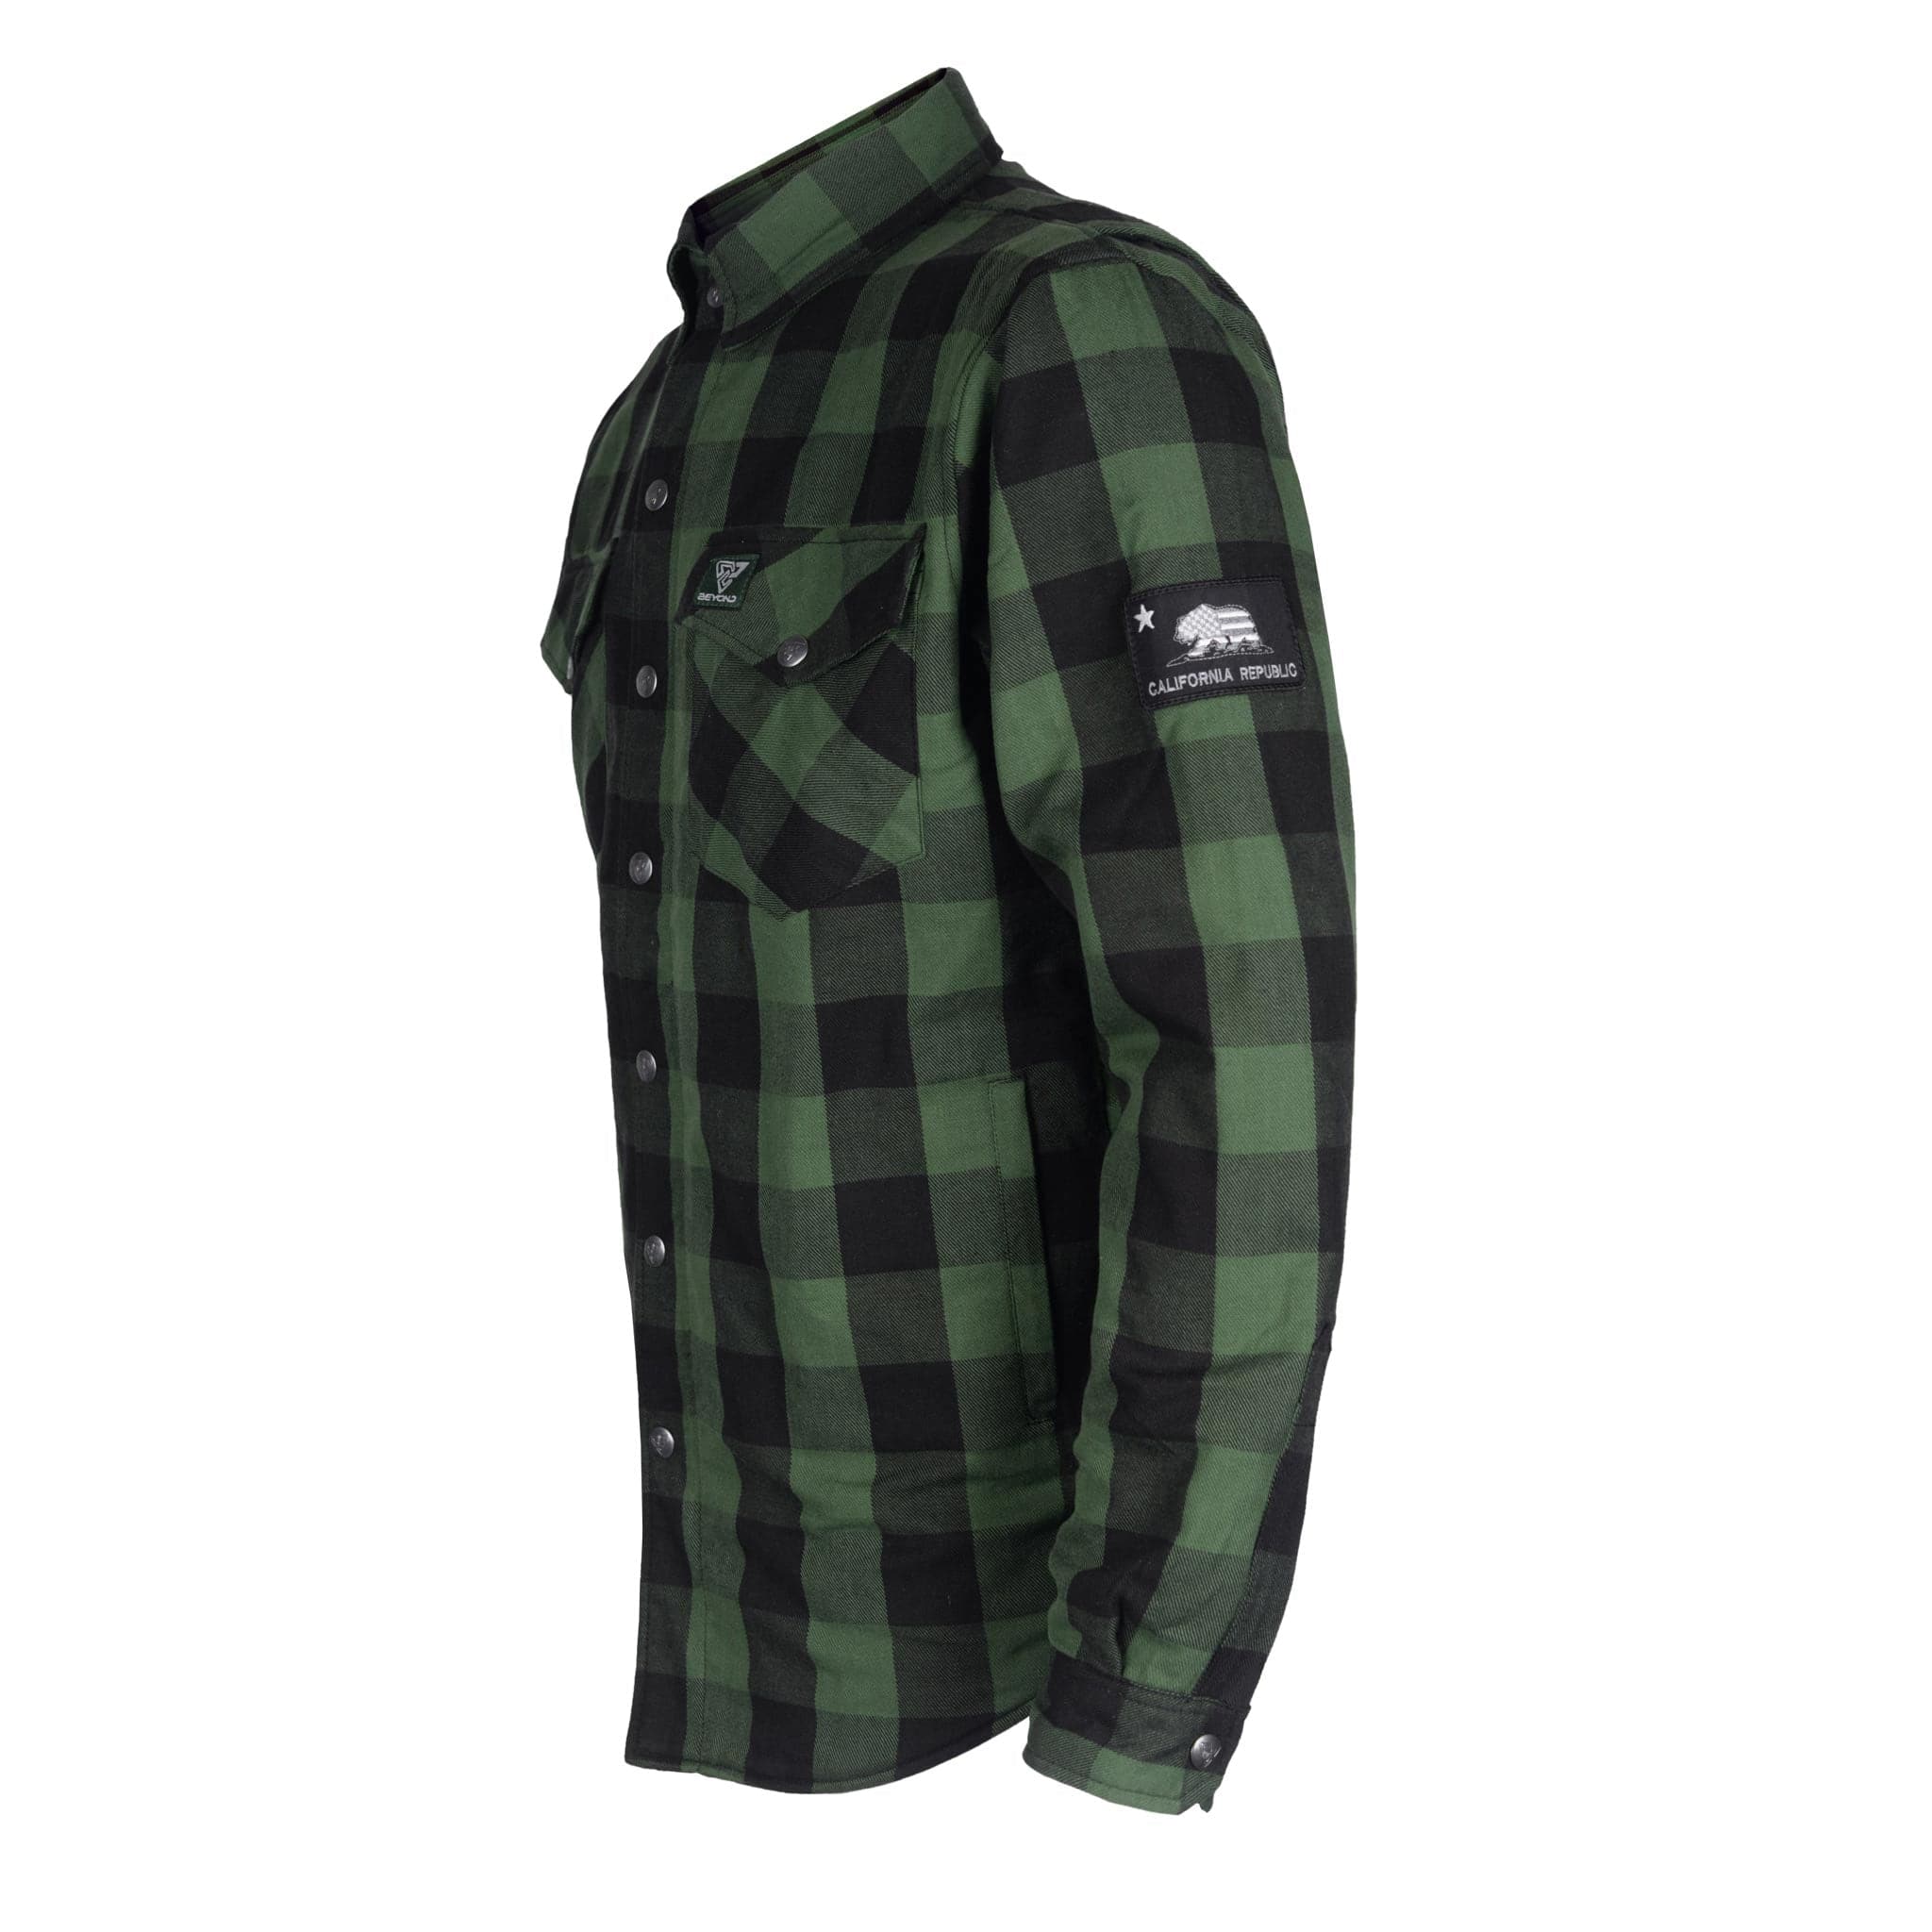 Protective Flannel Shirt "Forest Fury" - Green and Black with Pads